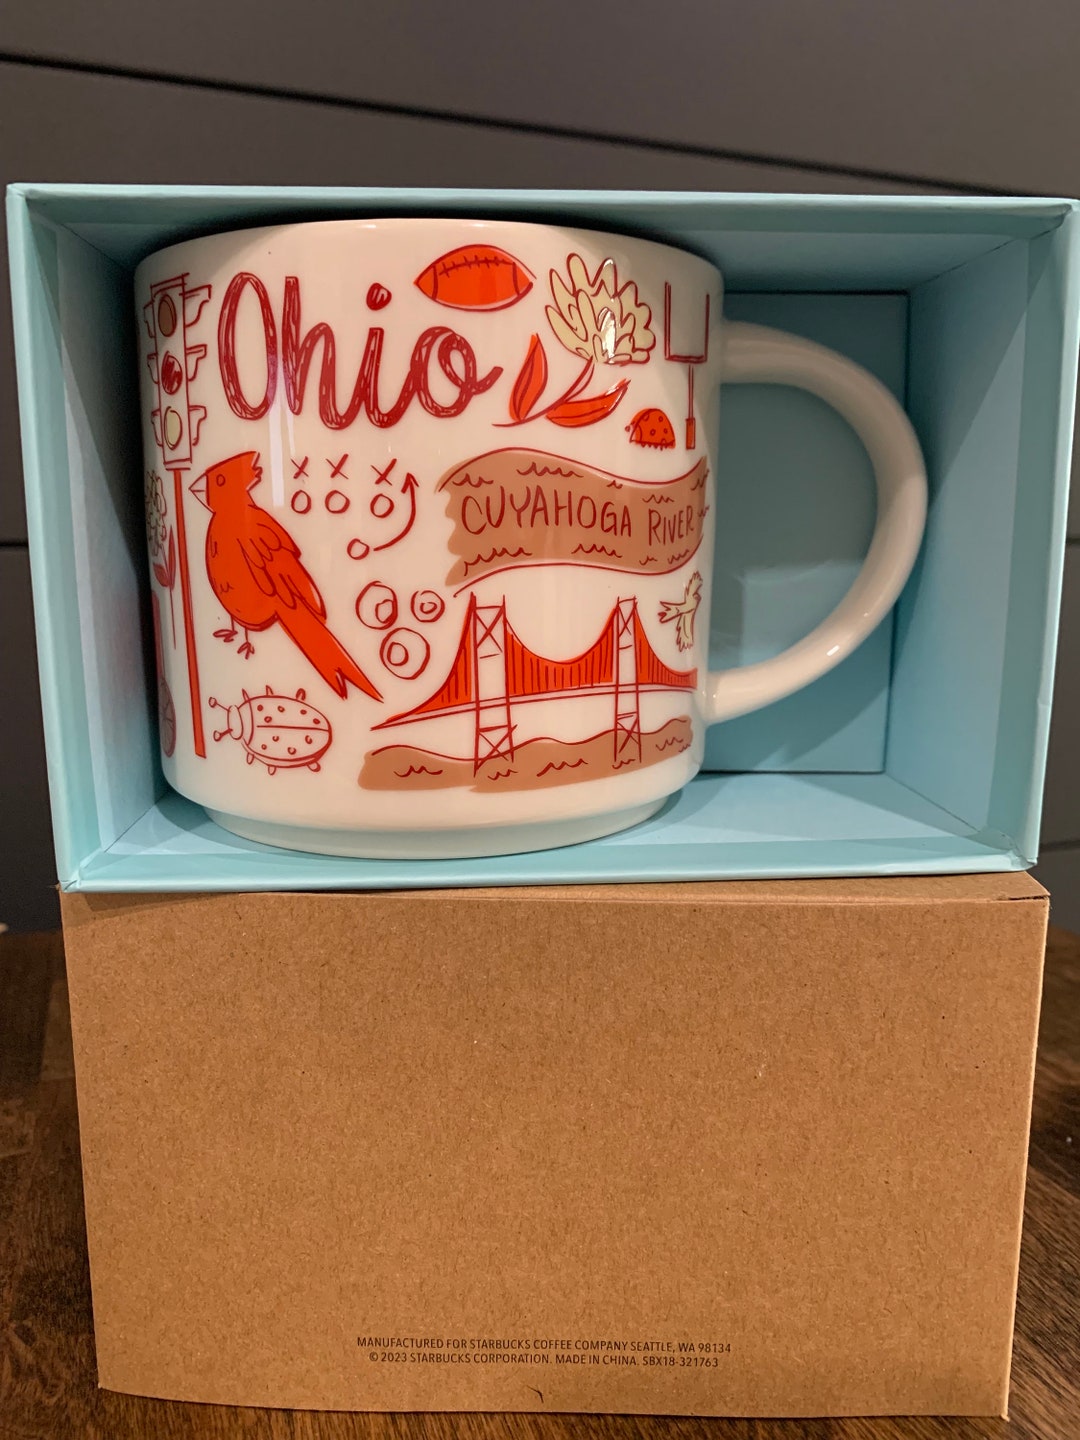 Starbucks has new Ohio and KY mugs. Which is your favorite?